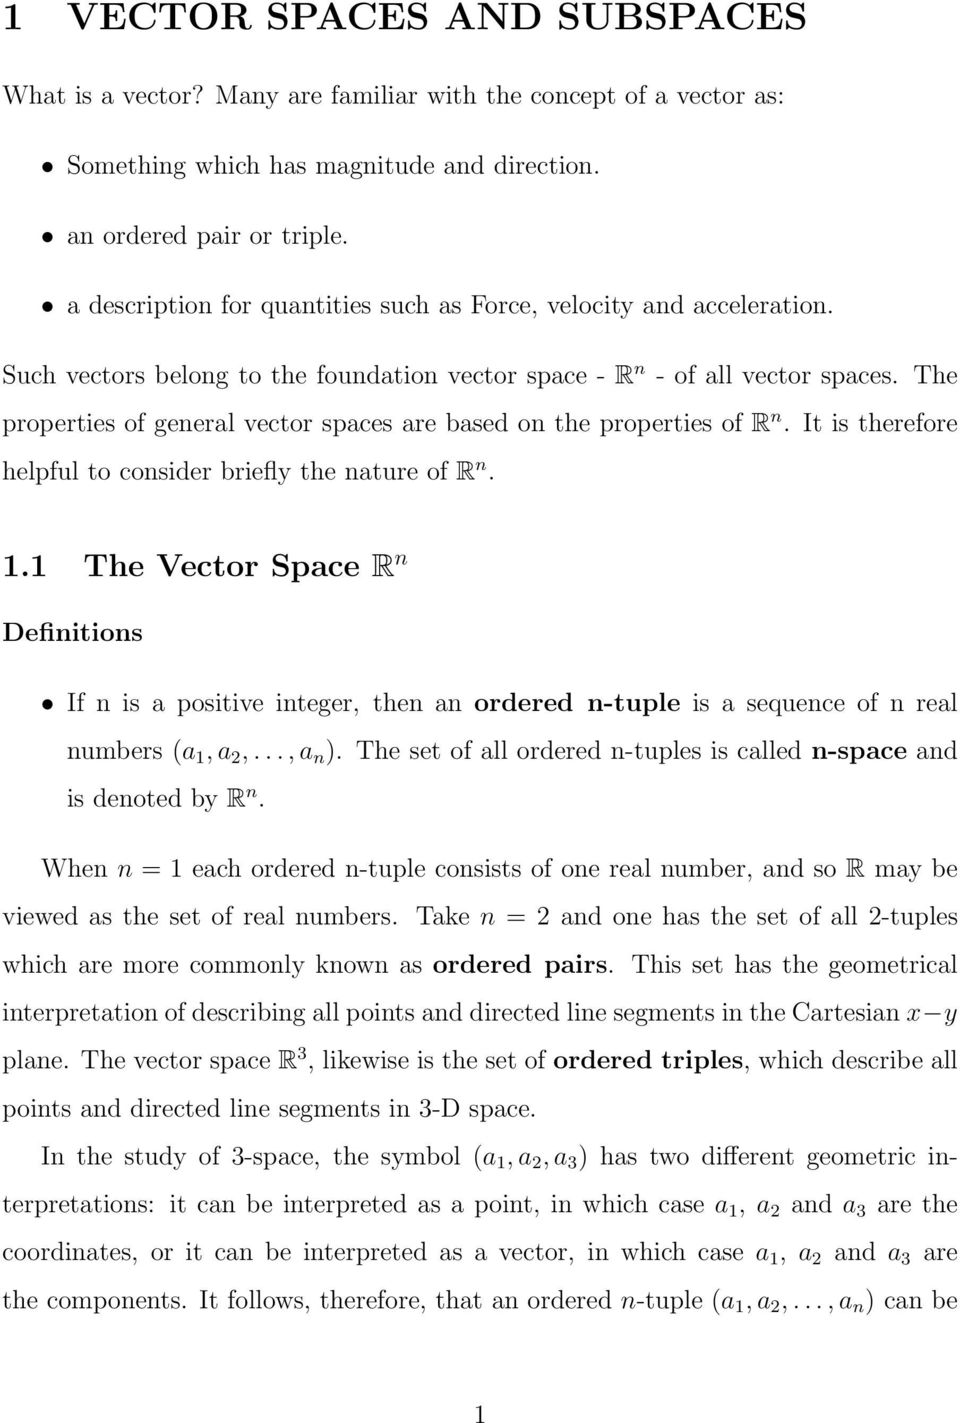 The properties of general vector spaces are based on the properties of R n. It is therefore helpful to consider briefly the nature of R n. 1.